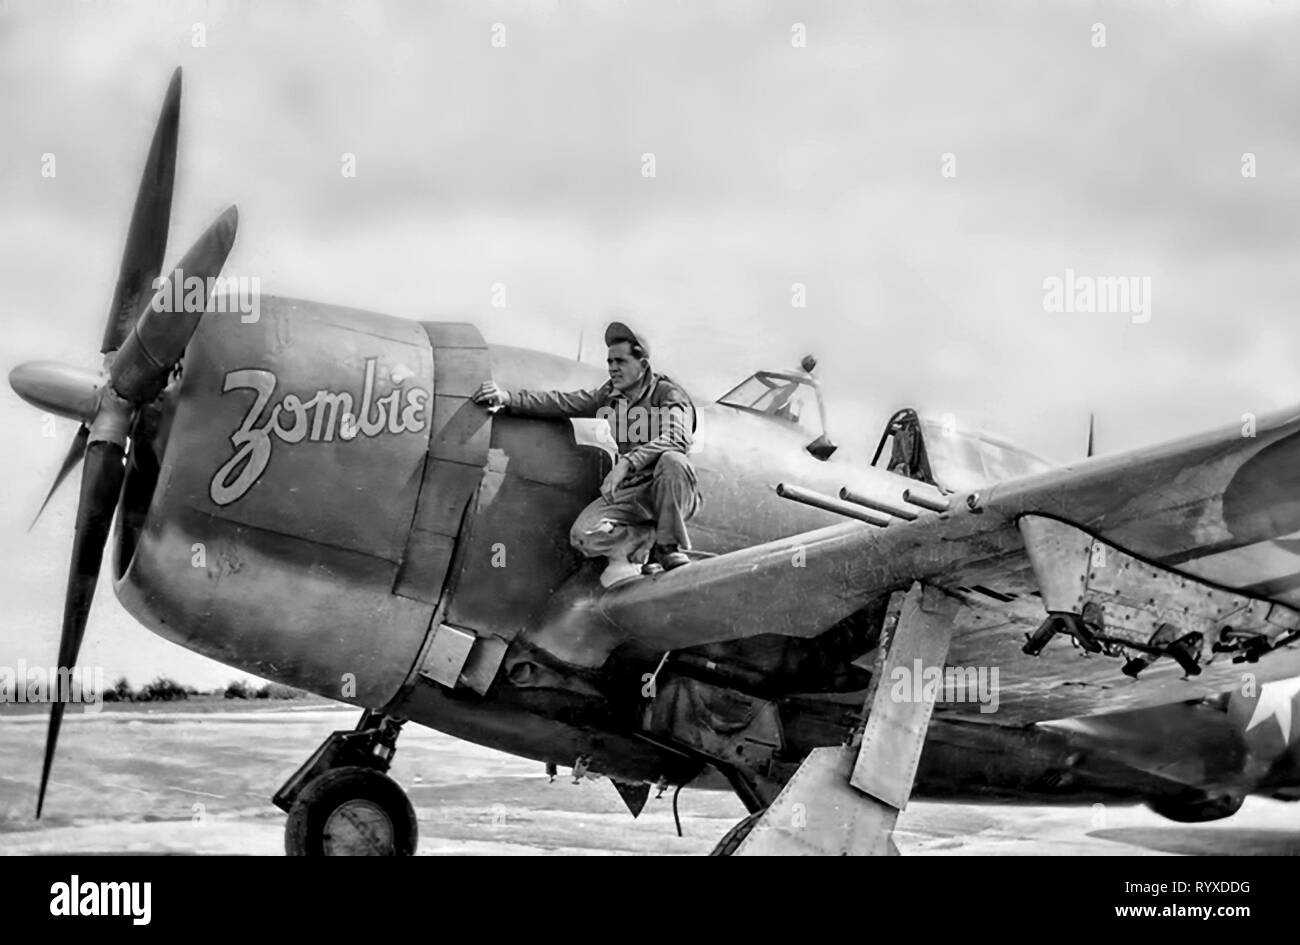 Personal photographs and memorabilia of fighting Americans during the Second World War. P-47 Thunderbolt fighter ground crew and nose art. Stock Photo